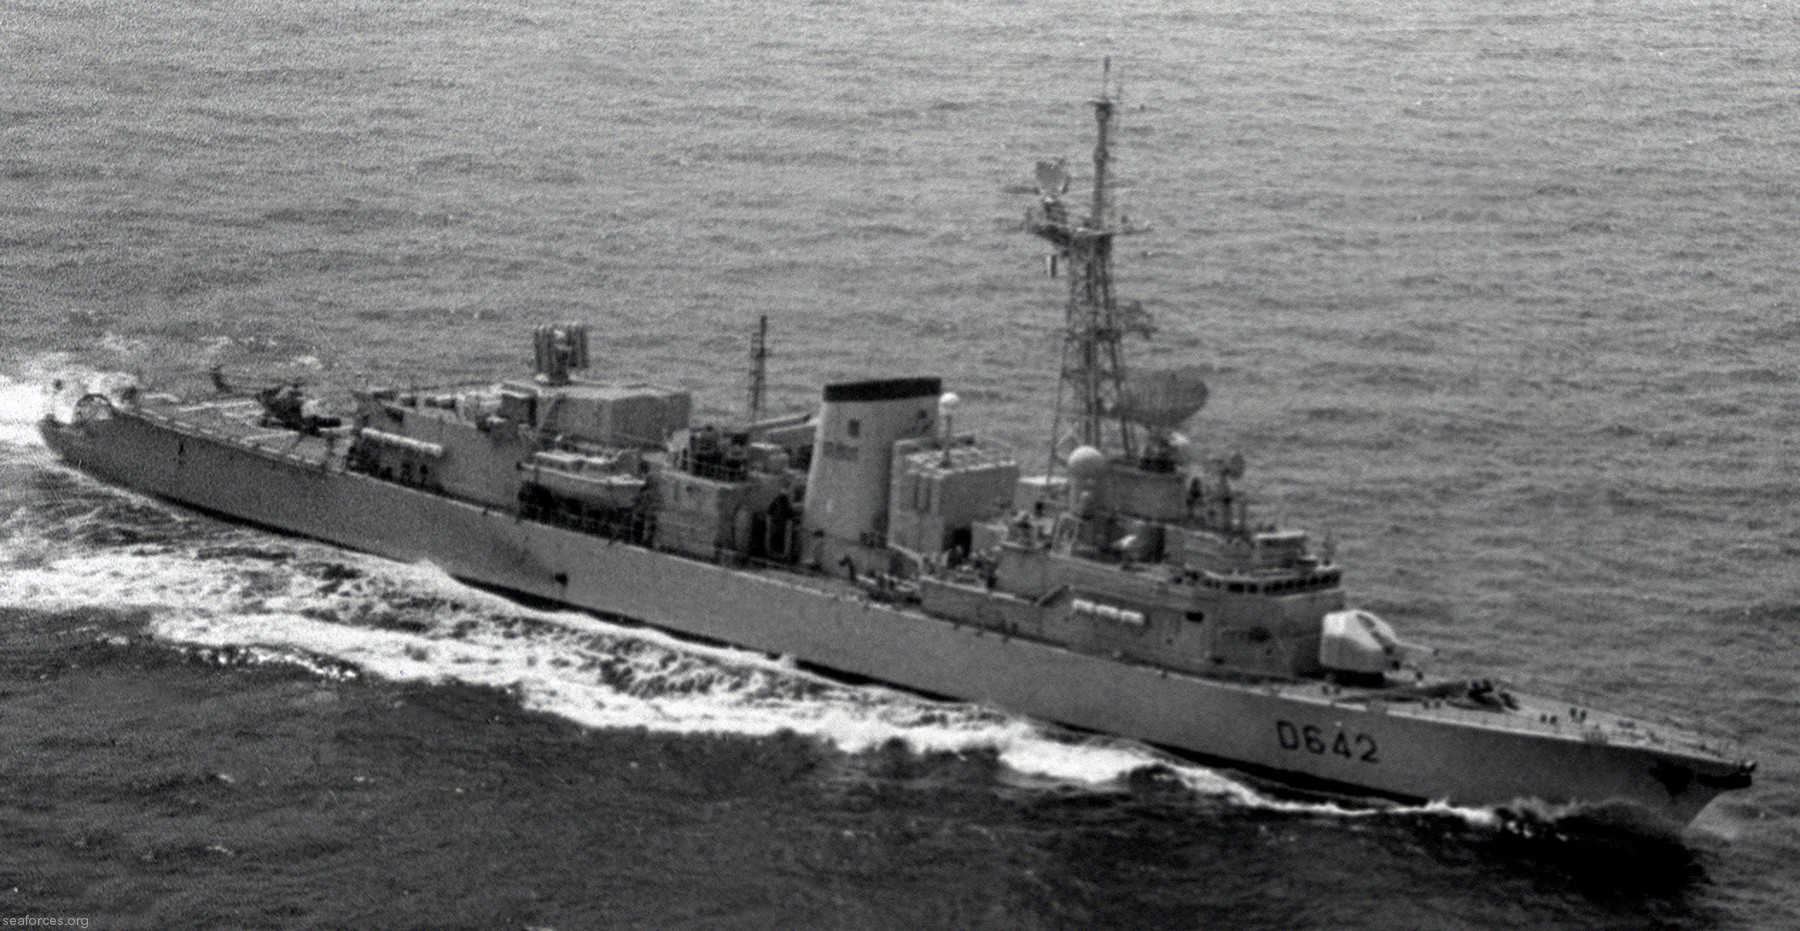 d-642 fs montcalm georges leygues f70as class anti submarine frigate destroyer asw french navy marine nationale 03